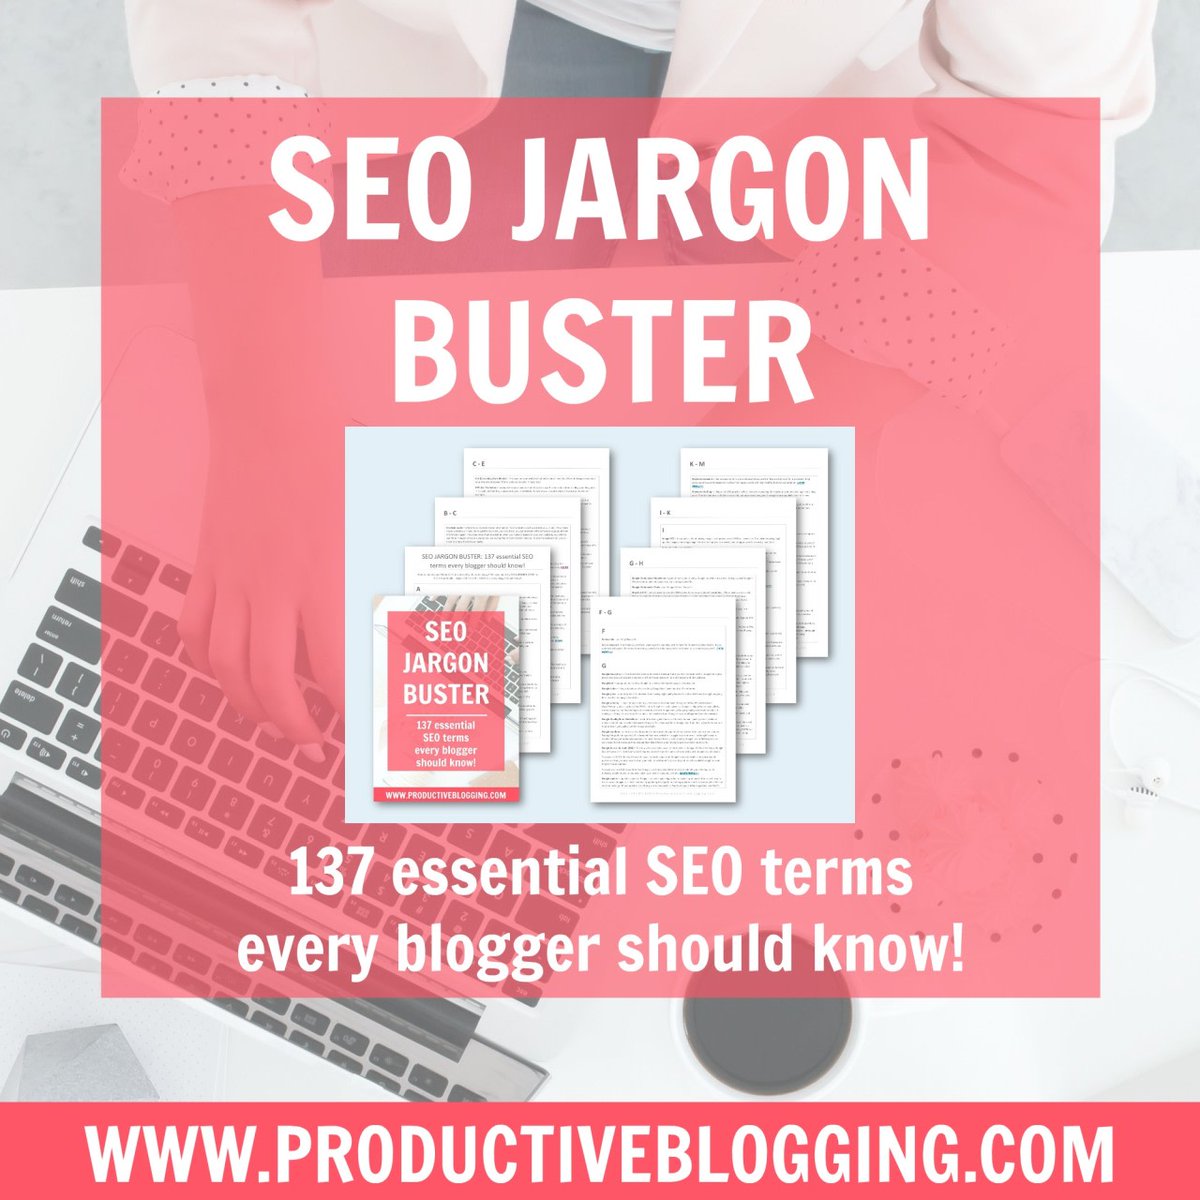 Want to understand SEO better but confused by the terminology? Then you need my SEO JARGON BUSTER! In this free printable, I explain 137 essential SEO terms every blogger should know >>> bit.ly/2I7Ahn7 #seojargon #seotips #productiveblogging